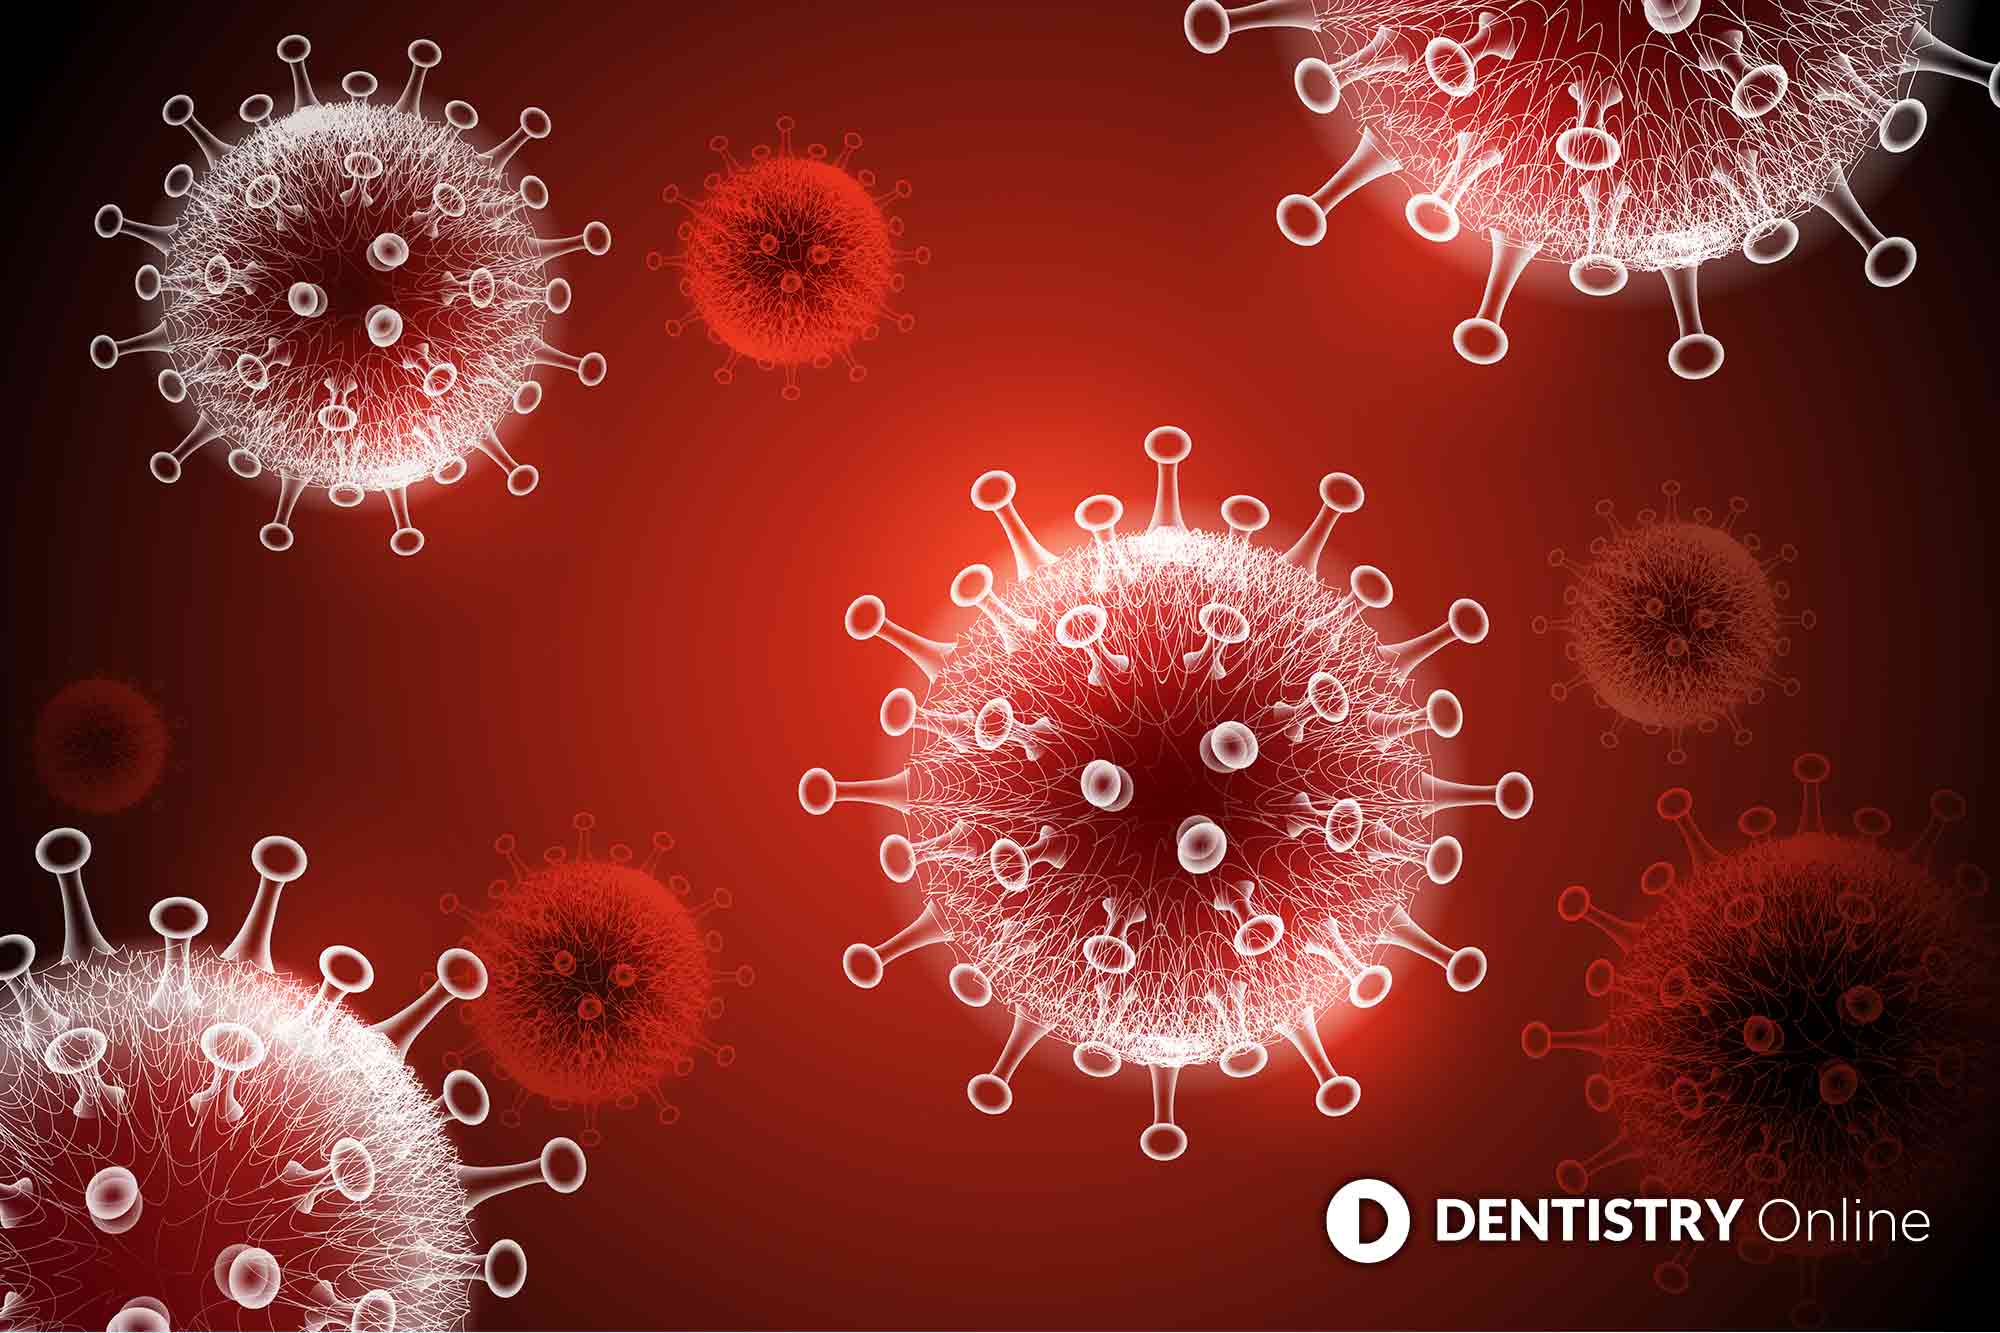 The UK's chief dental officers have released a joint letter in response to the growing number of coronavirus cases